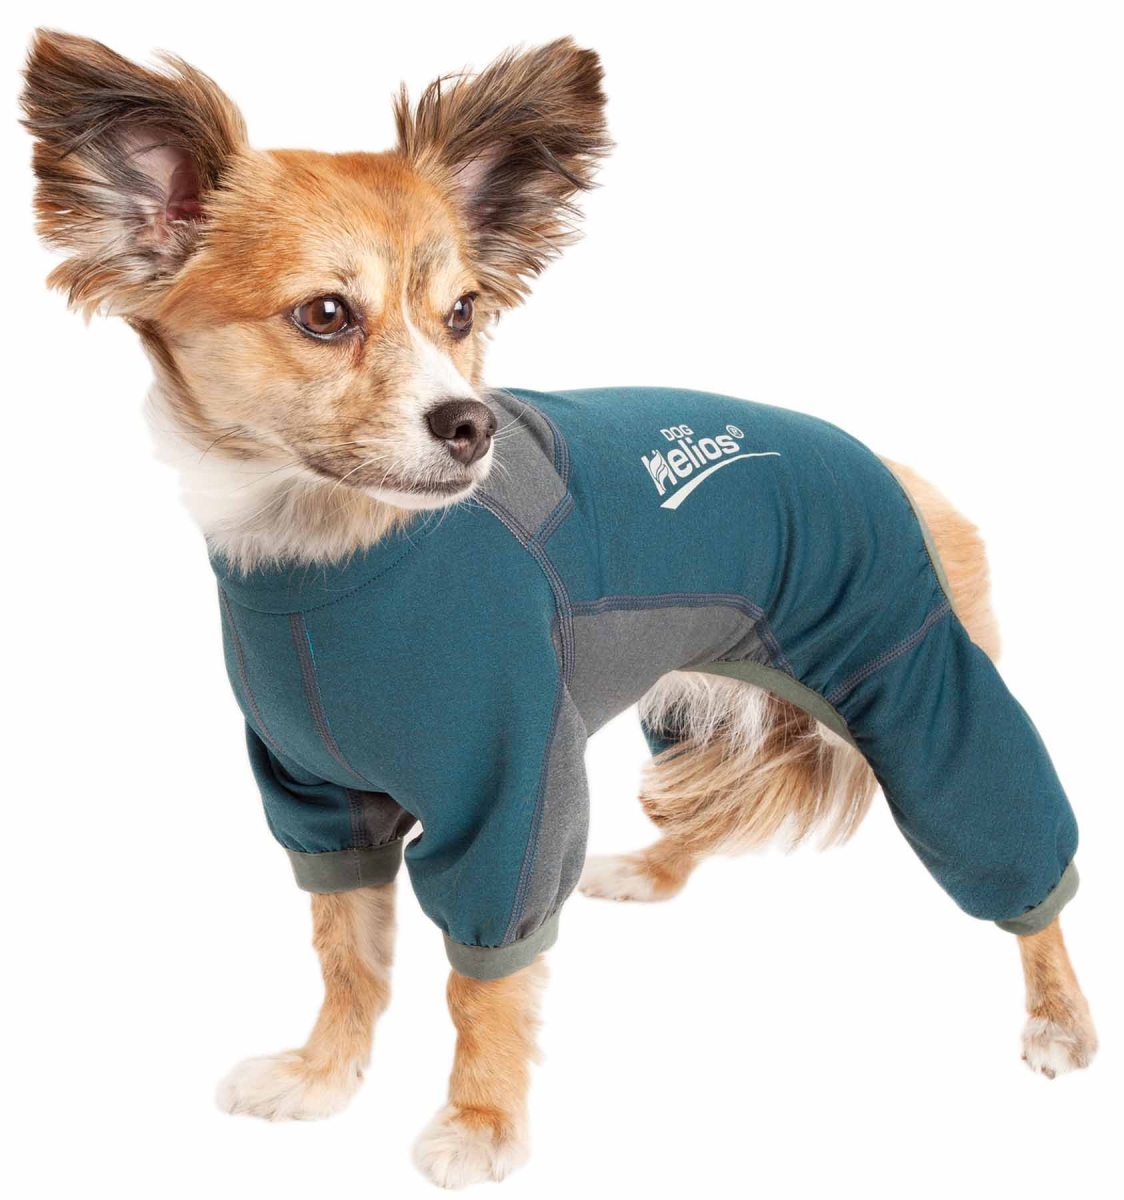 Yghl8blxl Rufflex 4-way-stretch Breathable Full Bodied Performance Dog Warmup Track Suit - Blue & Grey, Extra Large